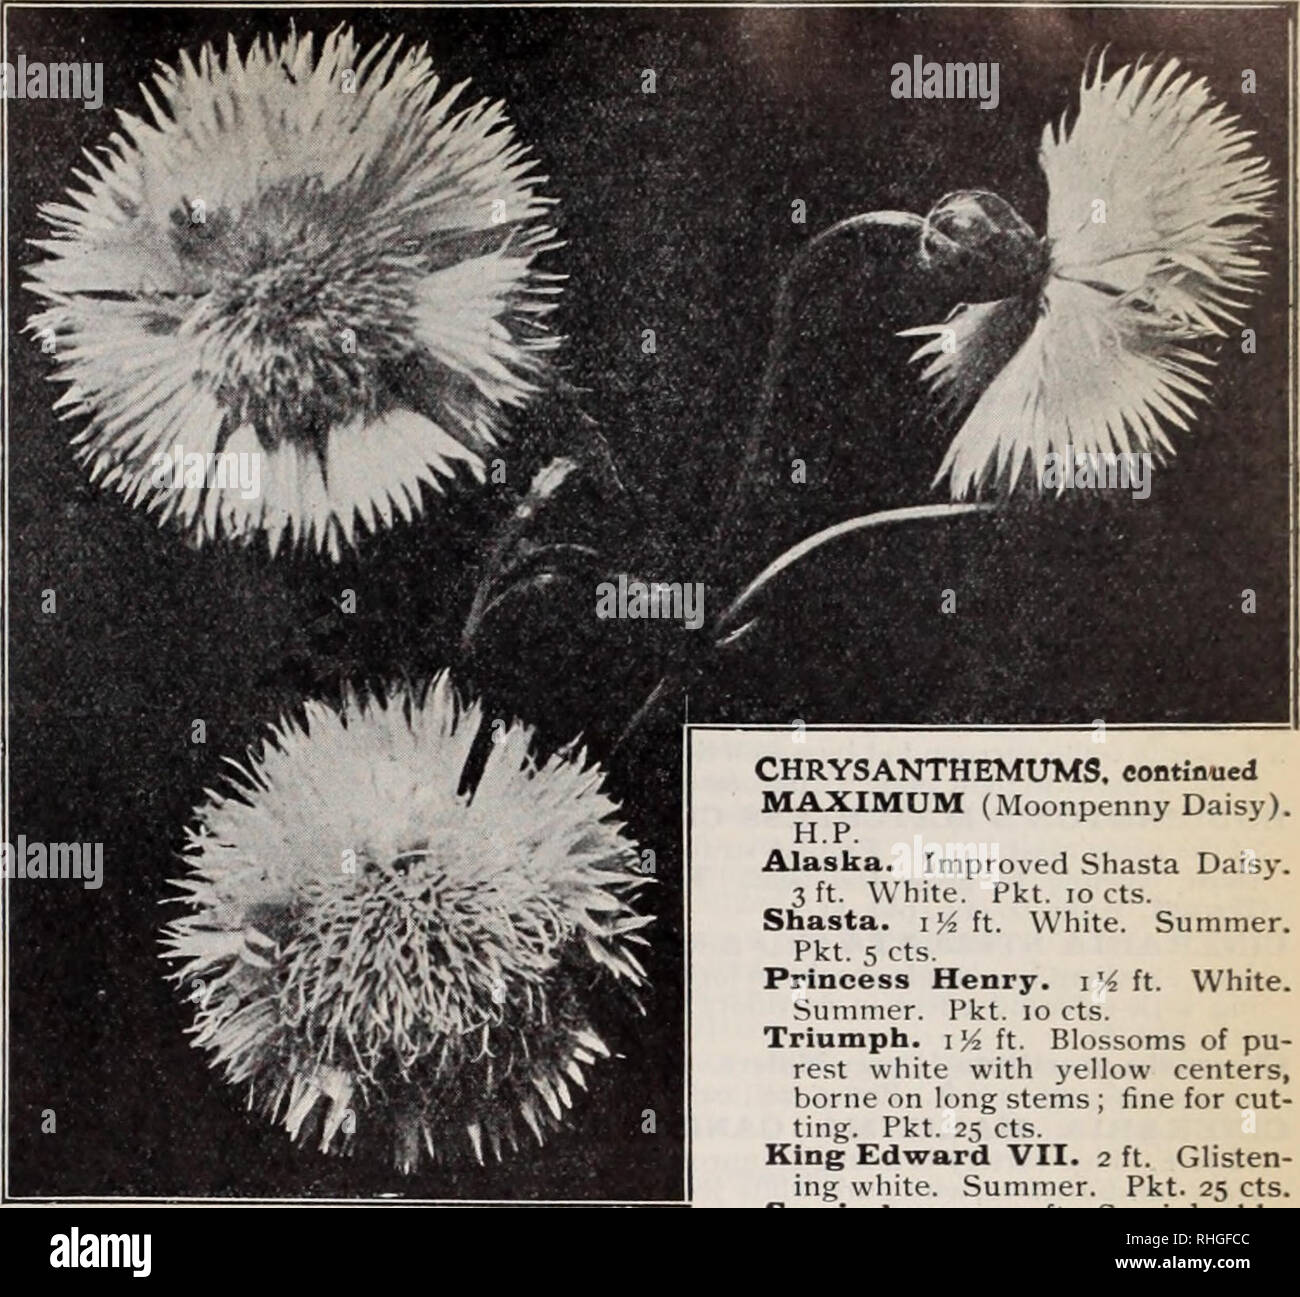 . Boddington's quality bulbs, seeds and plants / Arthur T. Boddington.. Nursery Catalogue. BODDINGTON'S ^yUCttltO/ SEEDS 21 Centaurea h.h.p. and h.a. Candidissima (Dusty Miller), i ft. For Pkt. Oz. borders or edgings .1,000 seeds, 75c..jSo 20 Gymnocarpa. Taller than the above.. 10 $0 So Odorata Chameleon. Yellow and rose ; very fragrant 10 2 00 Margaritae. i ft. Flowers 2K inches across, of the purest white and delight- fully scented. A garden treasure 10 i 00 Suav'eolens (Yellow Sweet Sultan) 05 60 Montana, Blue. H.P. 2 ft. Summer.. 05 &quot; alba. H.P. 2ft, White.... 10 CYANUS (Blue Cornflow Stock Photo